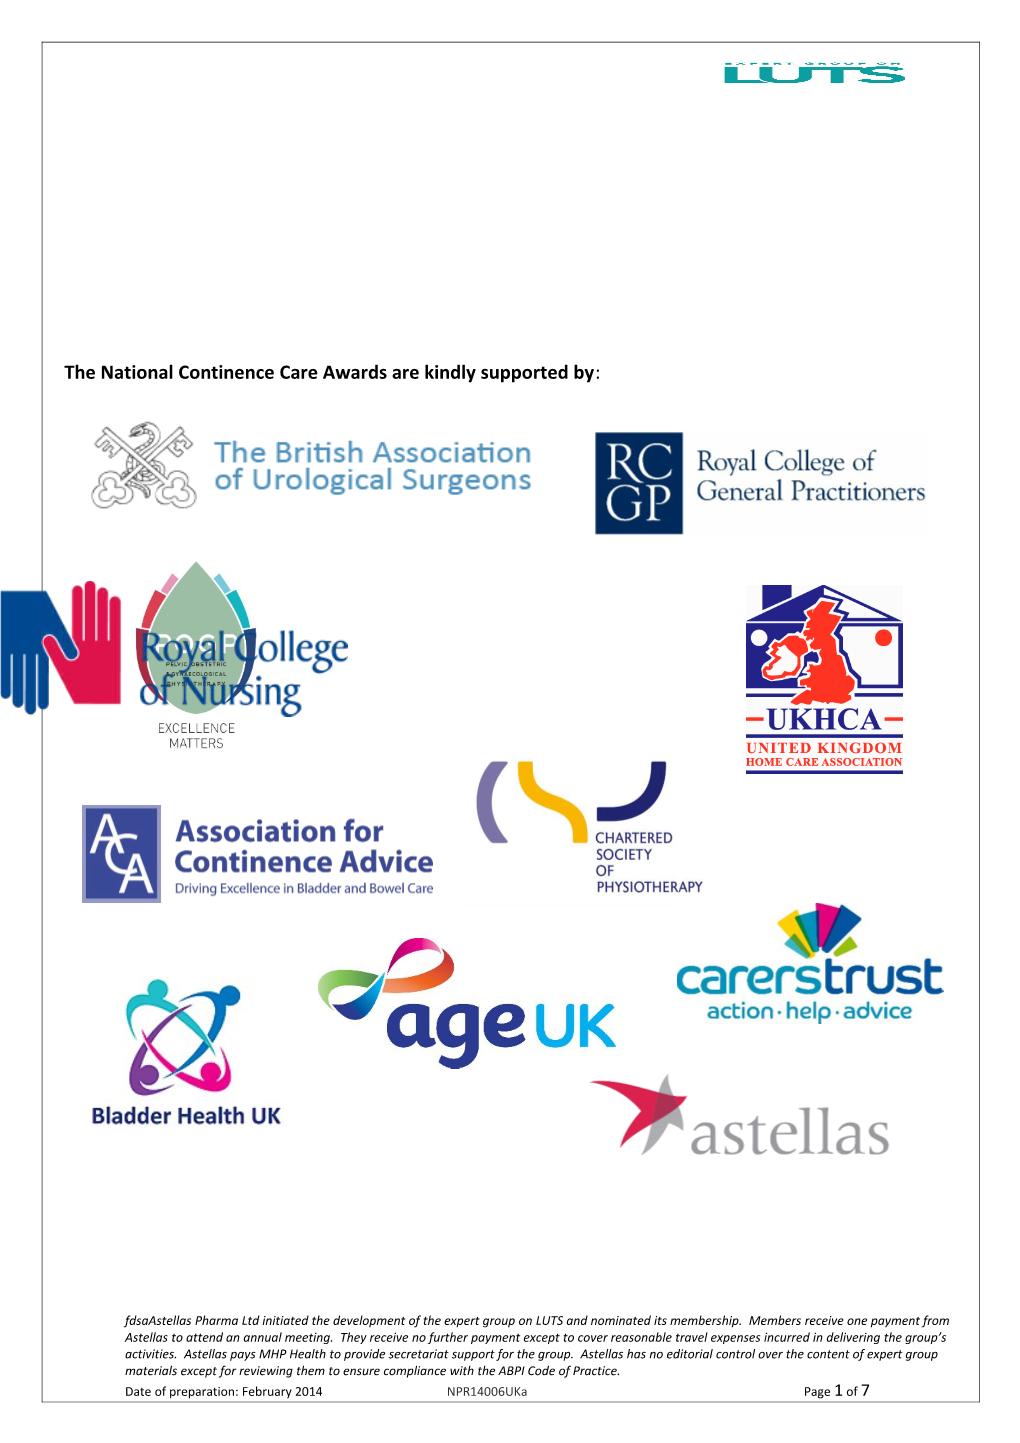 The National Continence Care Awards Are Kindly Supported by